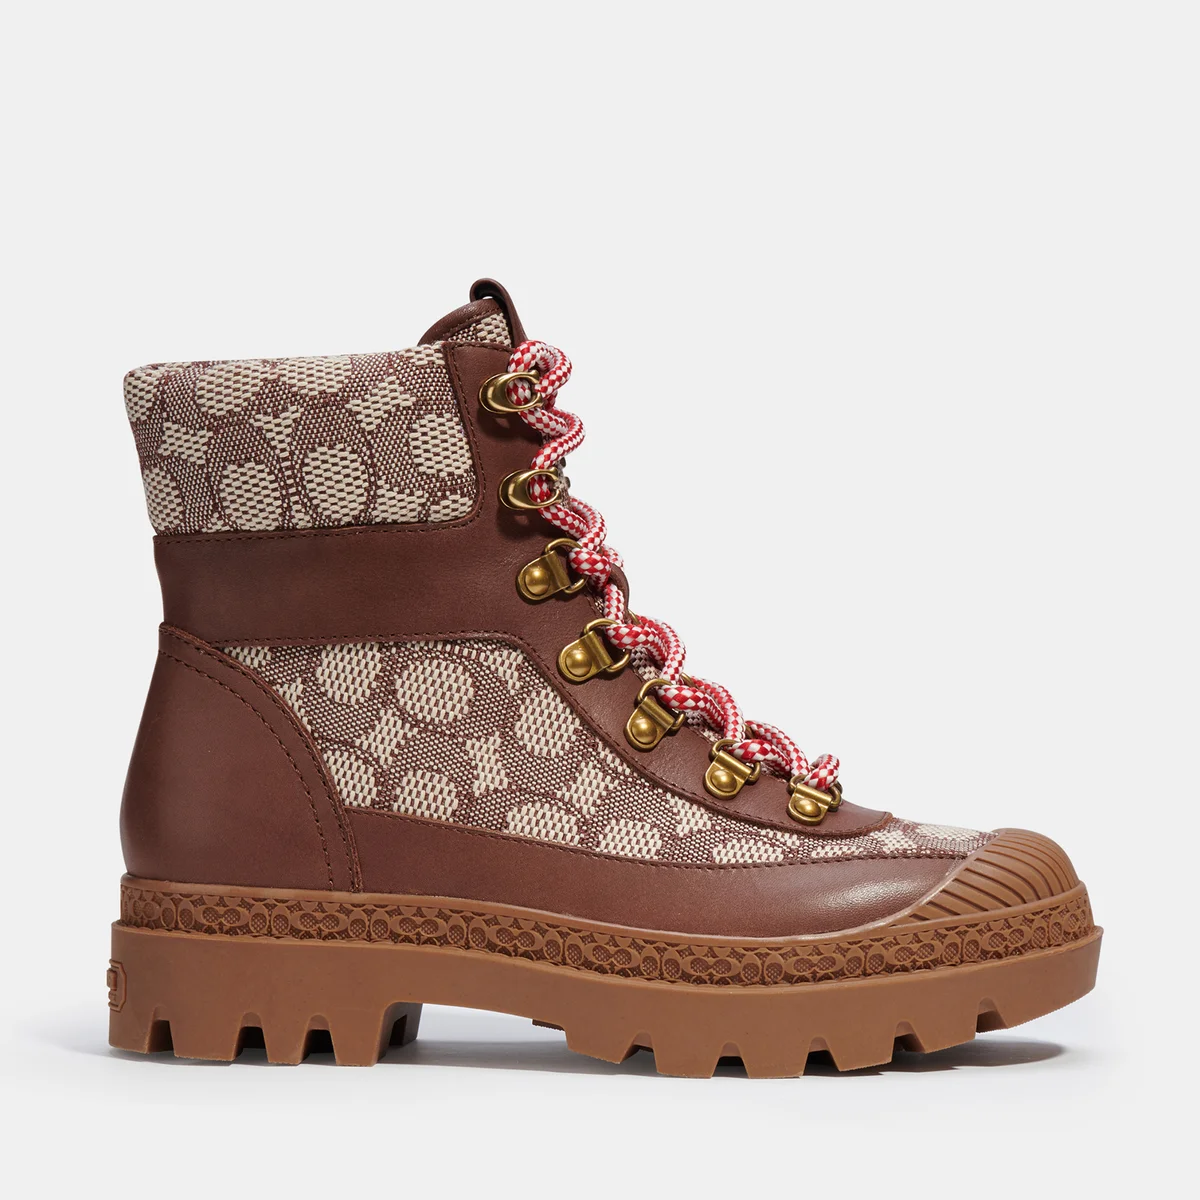 Coach Talia Jacquard, Suede and Leather Lace-Up Boots Image 1